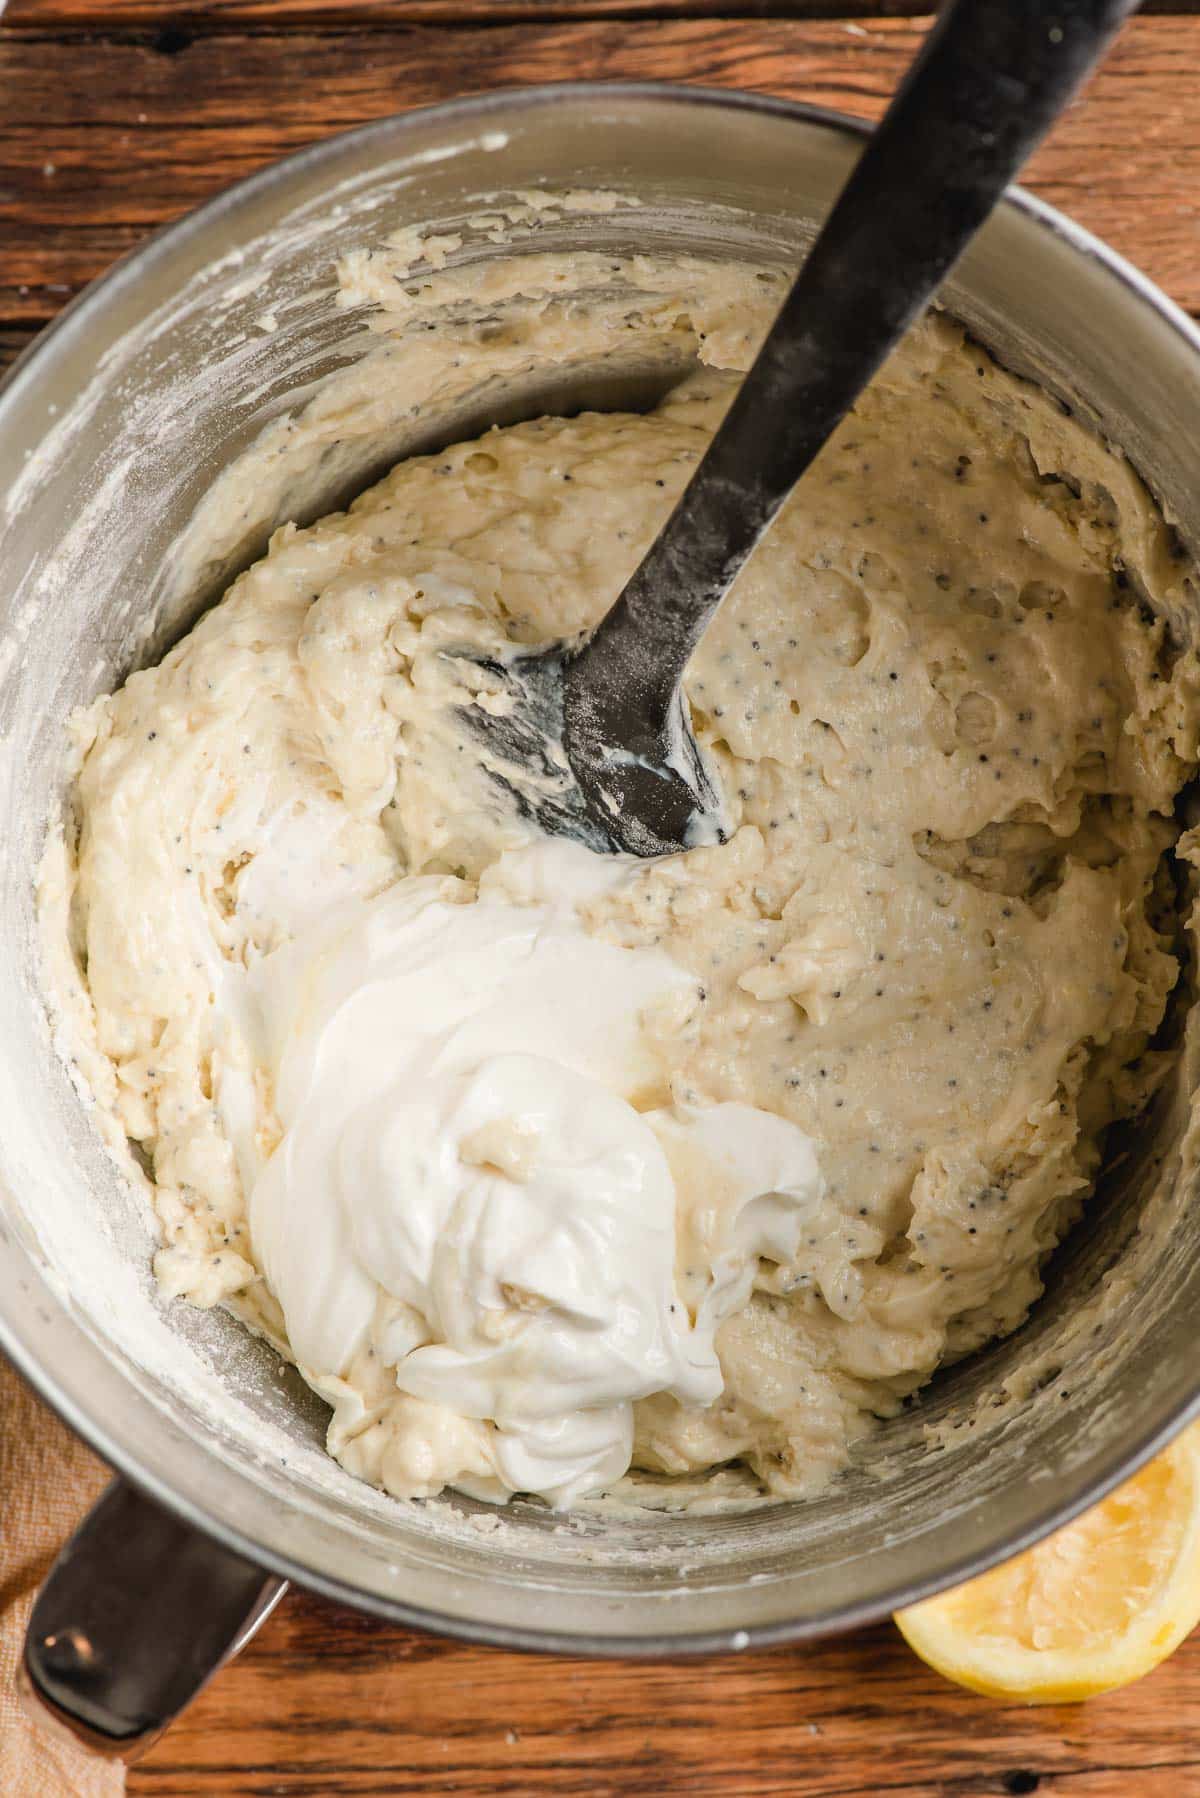 Sour cream being stirred into muffin batter.